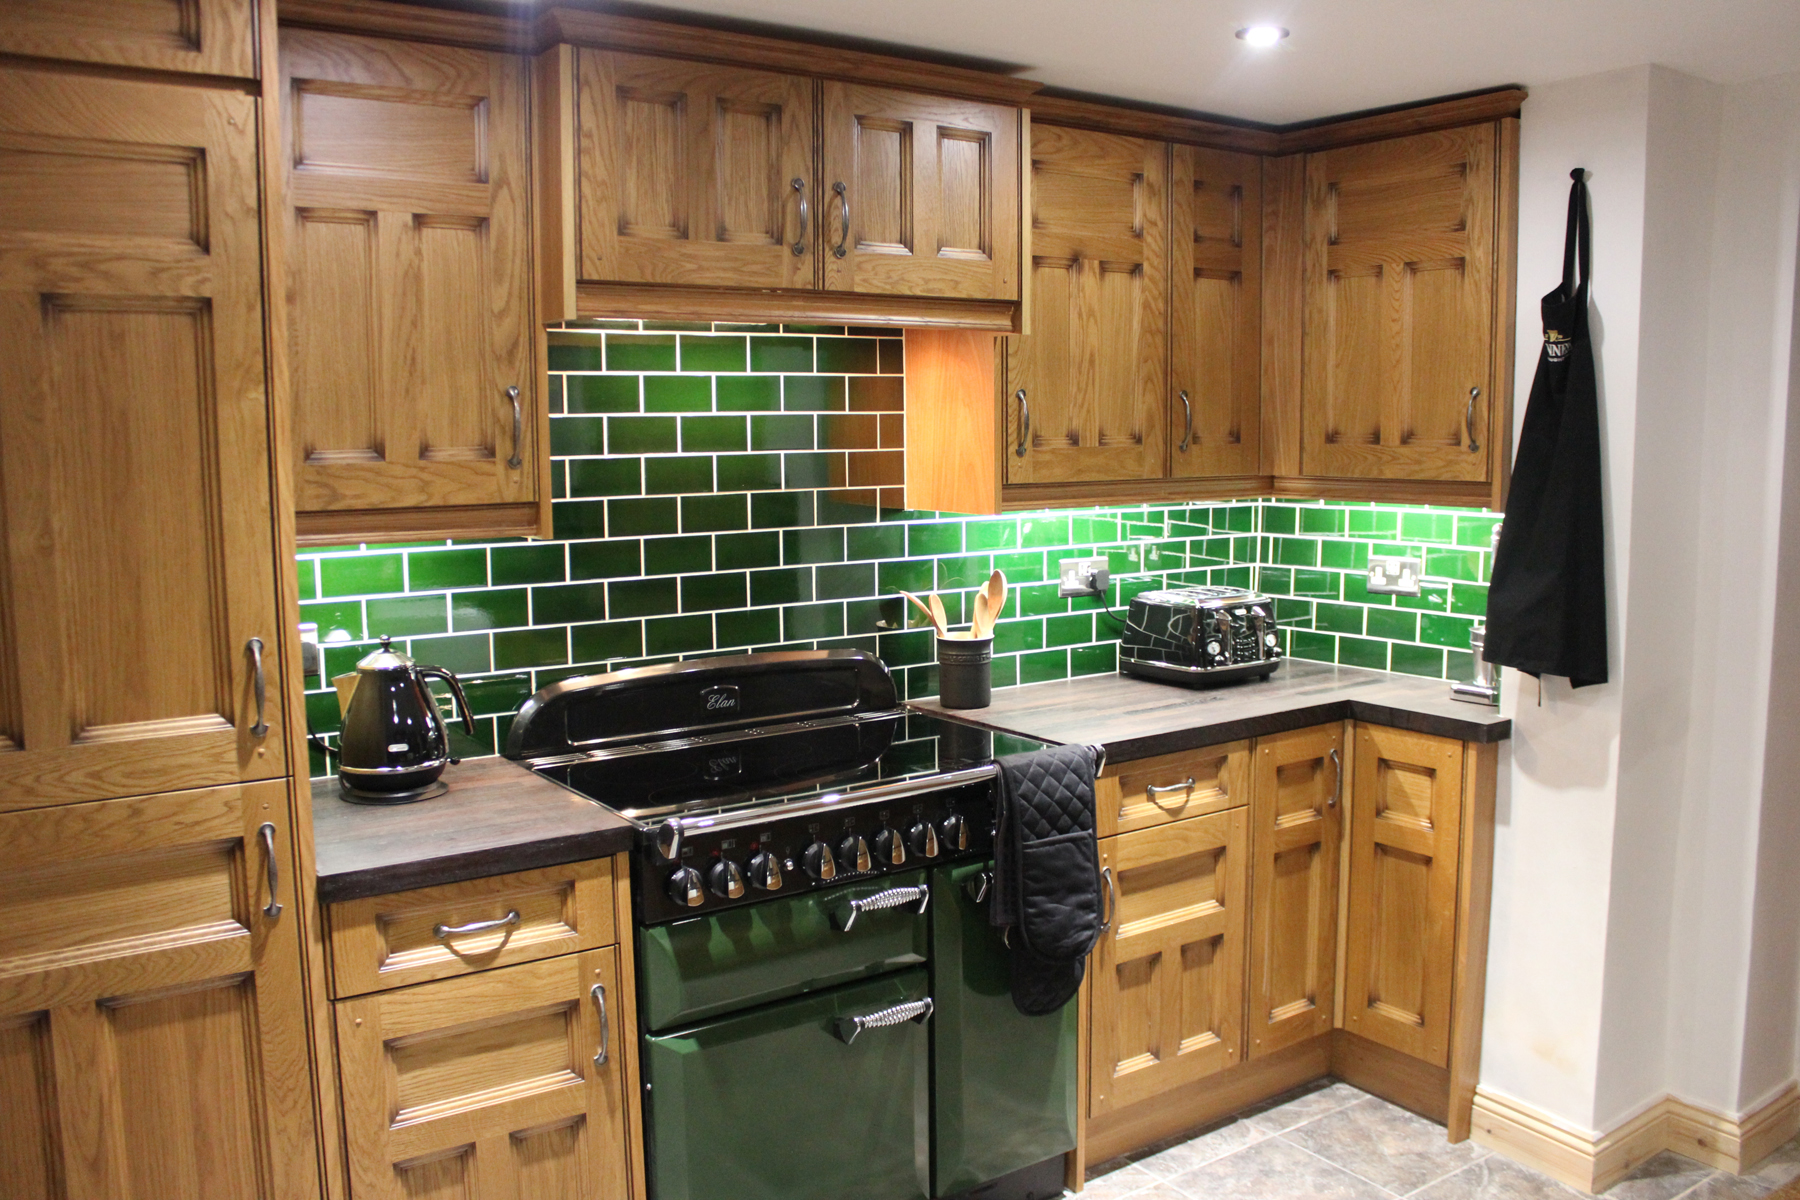 Kitchen with green brick walls and wooden cupboards